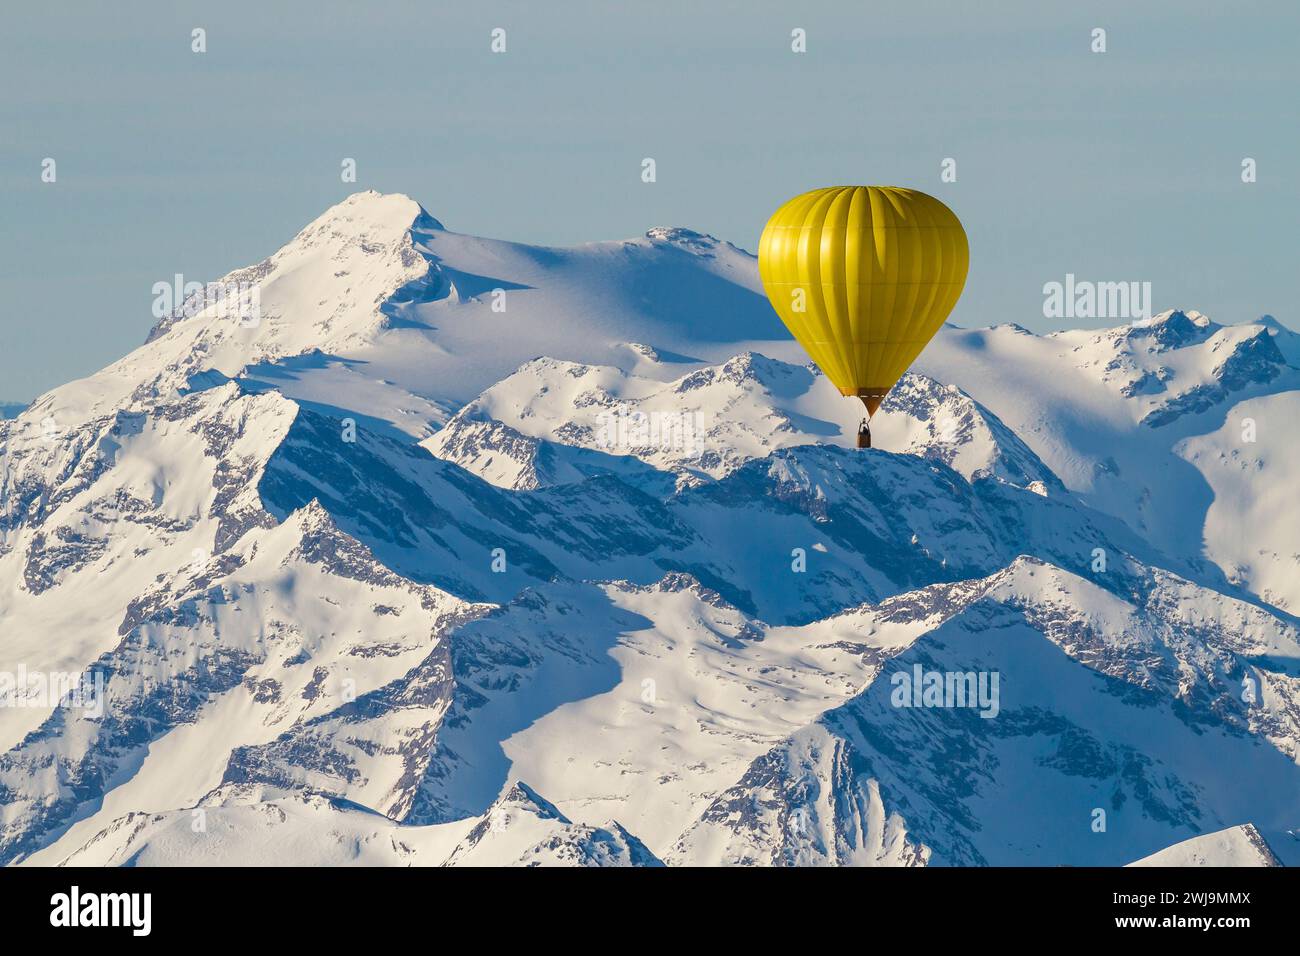 A yellow balloon flying over snow-covered mountains Stock Photo